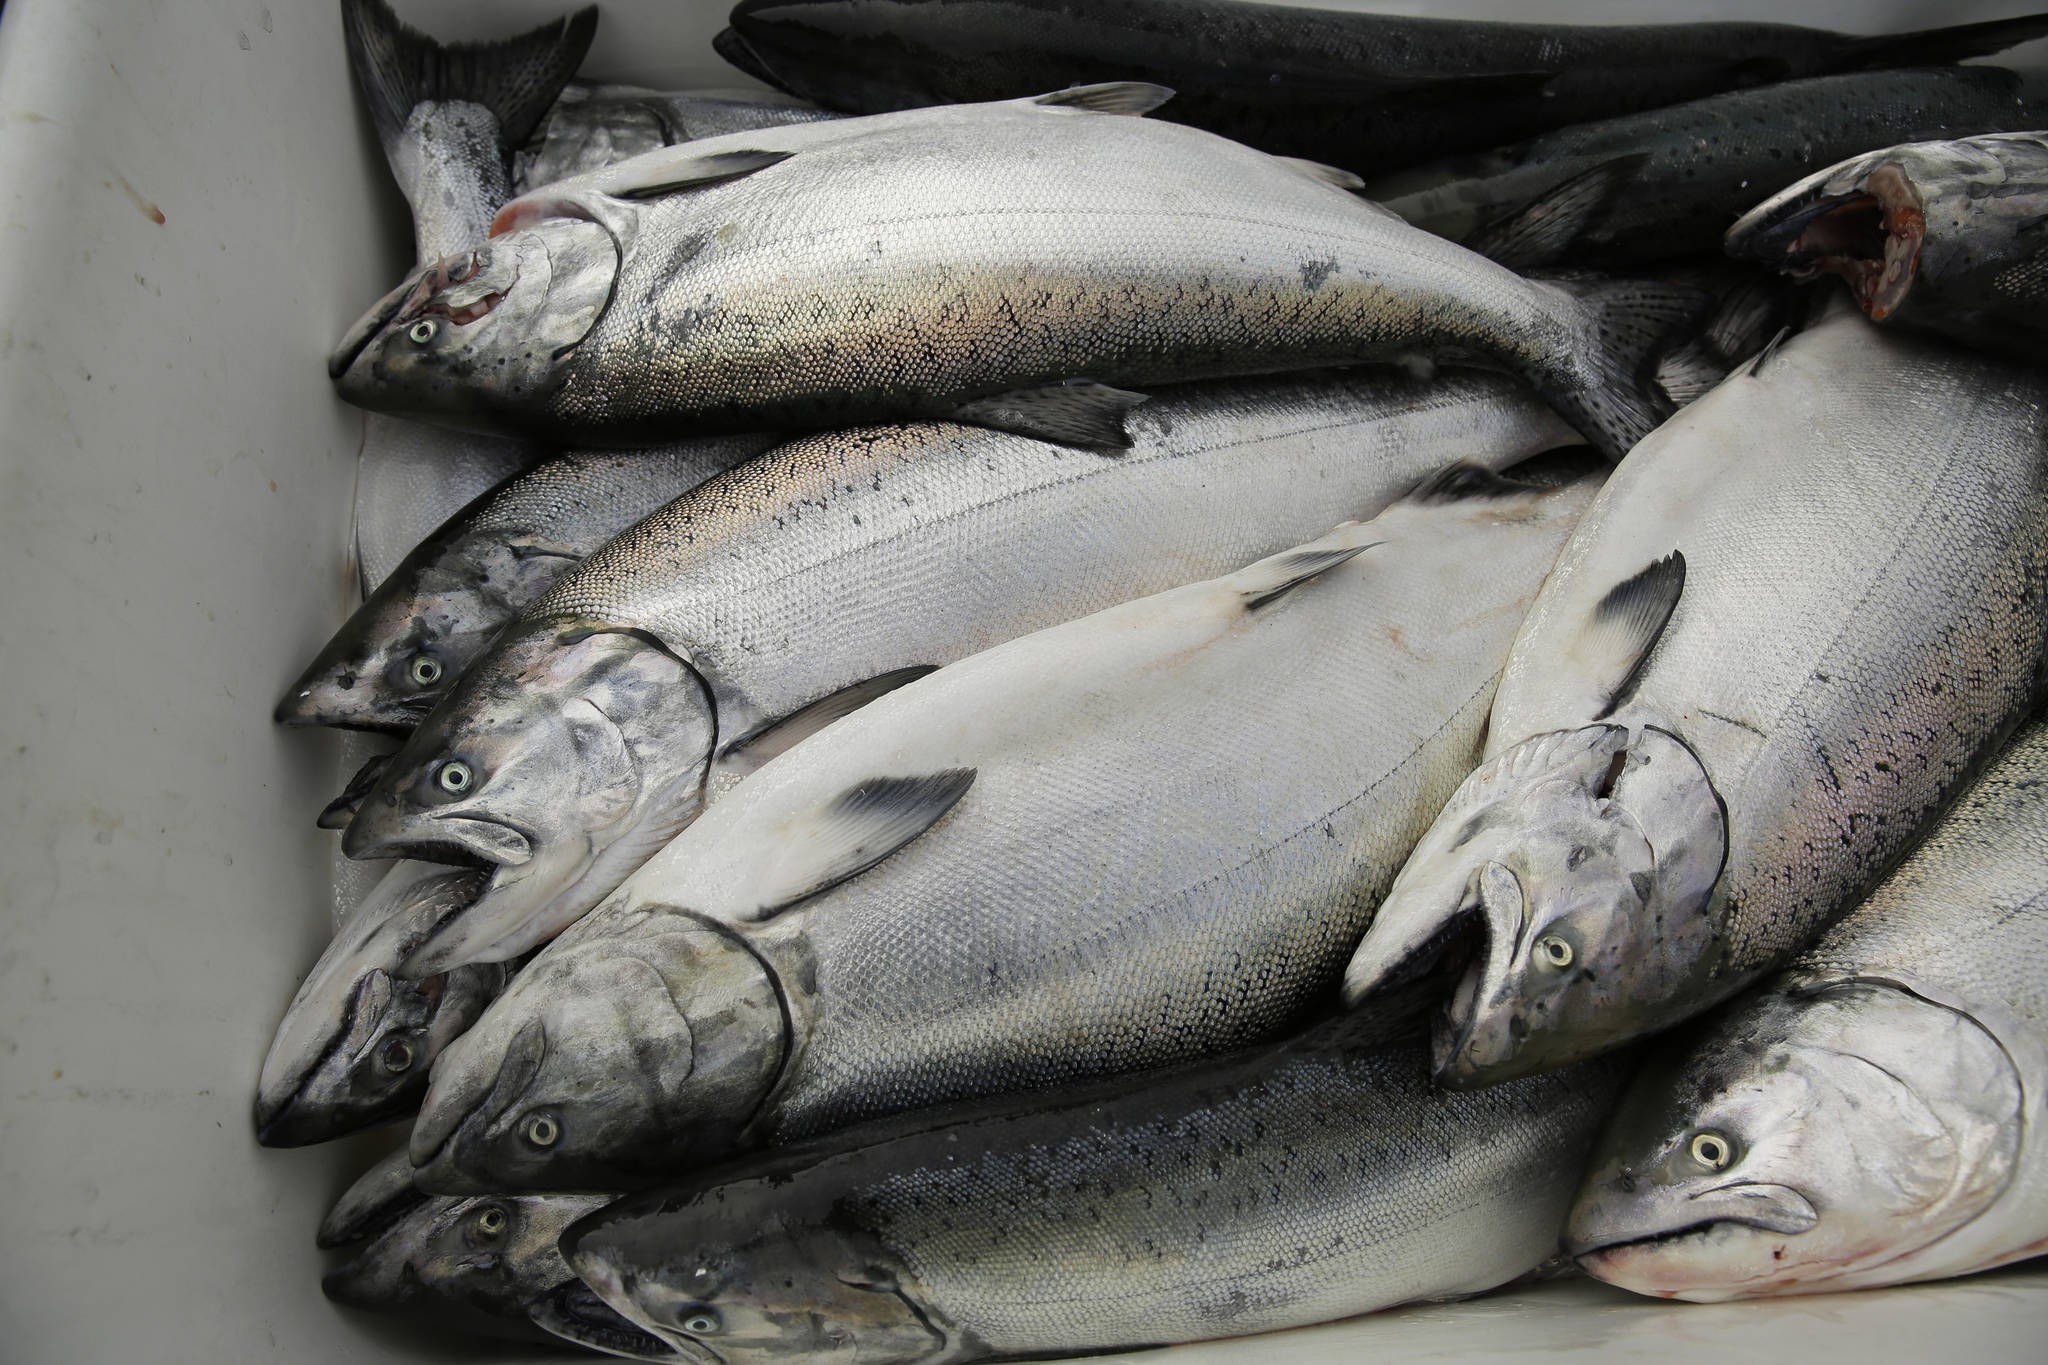 In this photo taken Monday, July 22, 2019, chinook salmon is seen after being unloaded at Fisherman’s Wharf in San Francisco. California fishermen are reporting one of the best salmon fishing seasons in more than a decade, thanks to heavy rain and snow that ended the state’s historic drought. It’s a sharp reversal for chinook salmon, also known as king salmon, an iconic fish that helps sustain many Pacific Coast fishing communities. (AP Photo/Eric Risberg)